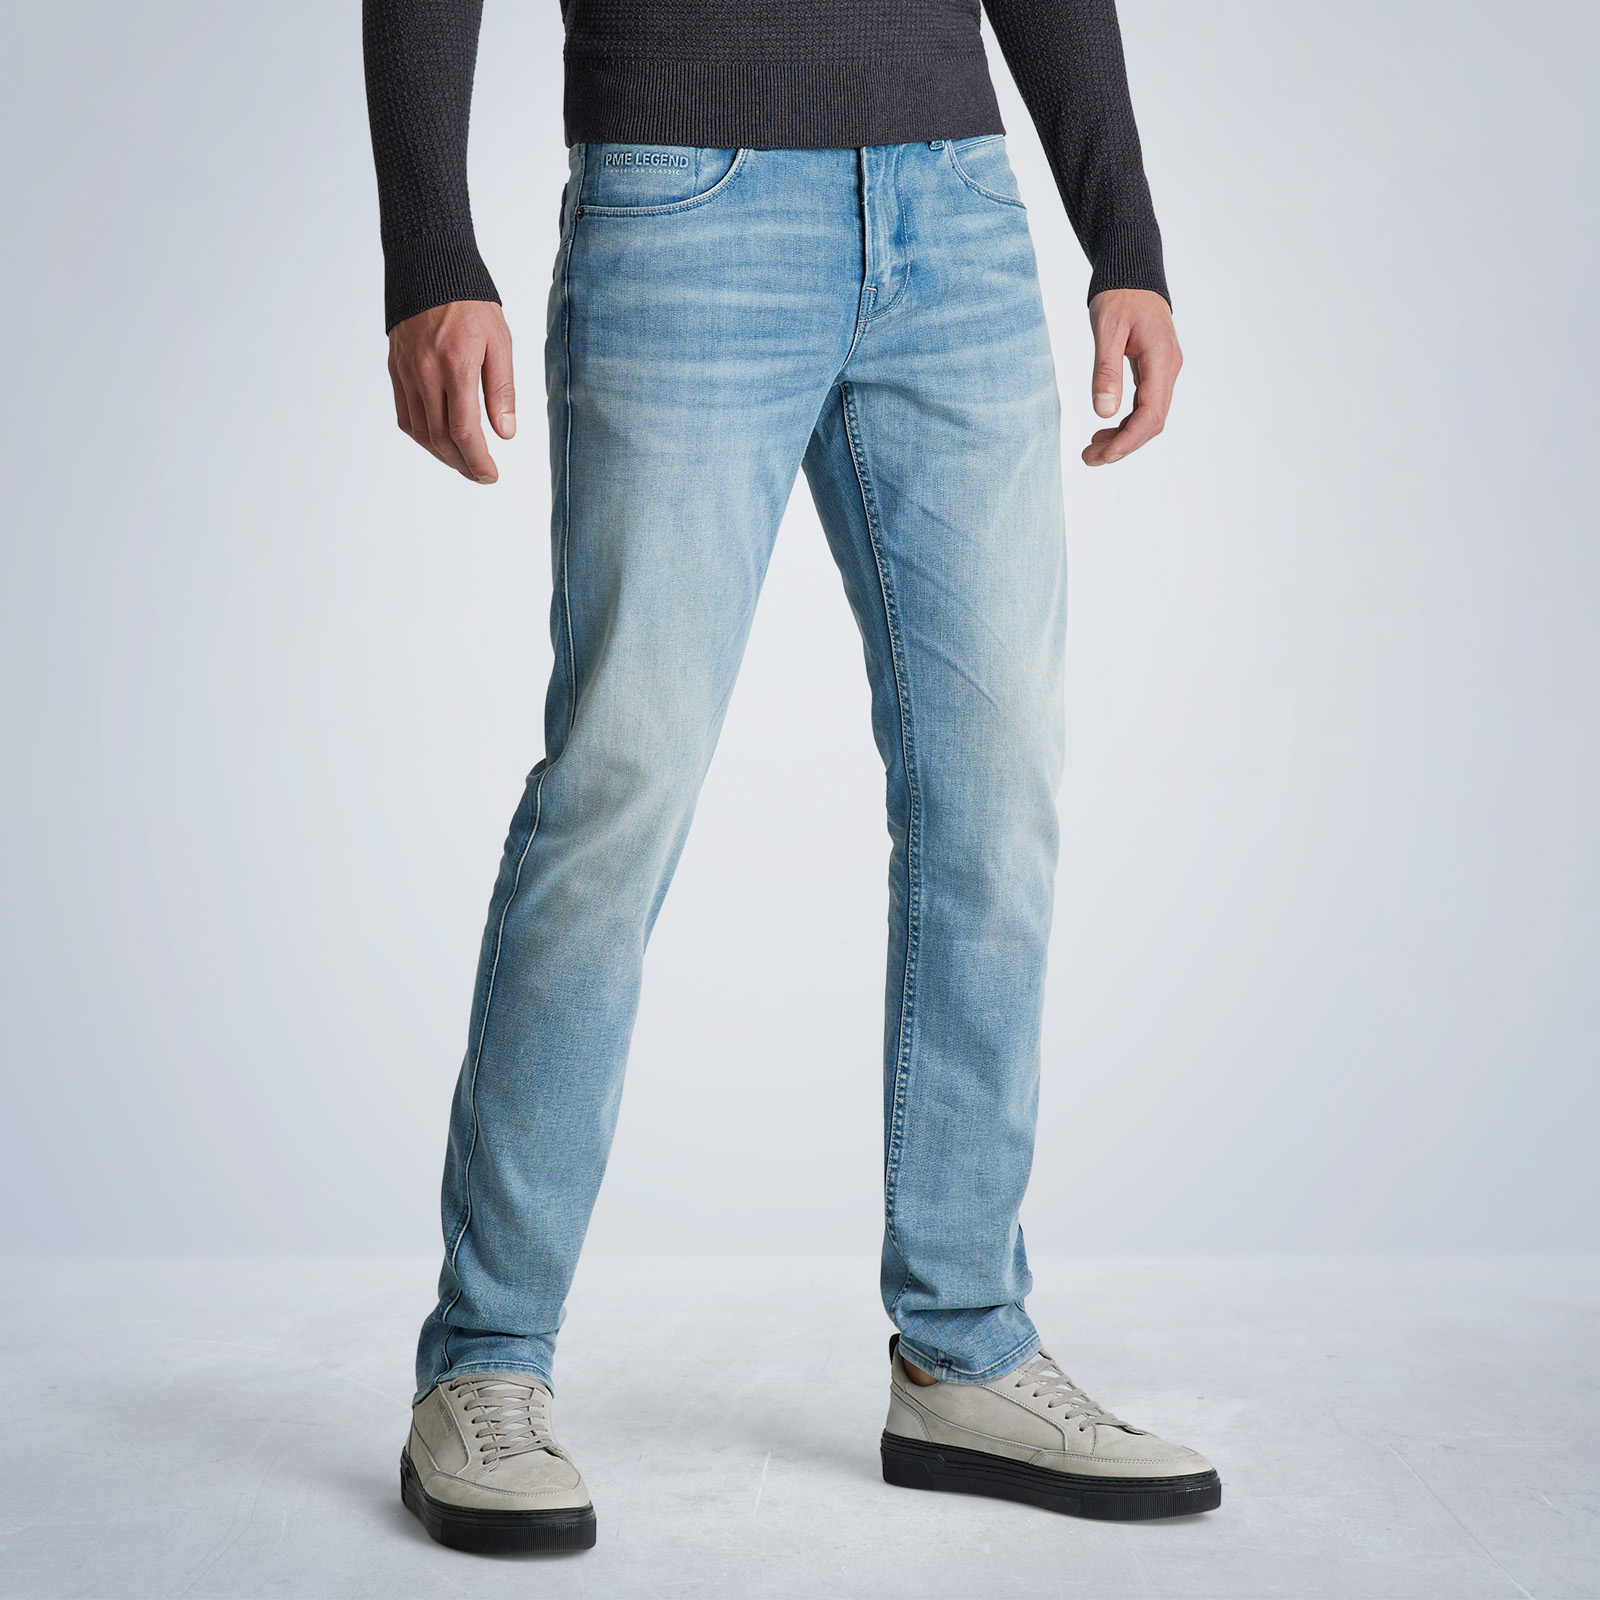 PME LEGEND | PME Legend returns Nightflight jeans Free | shipping and